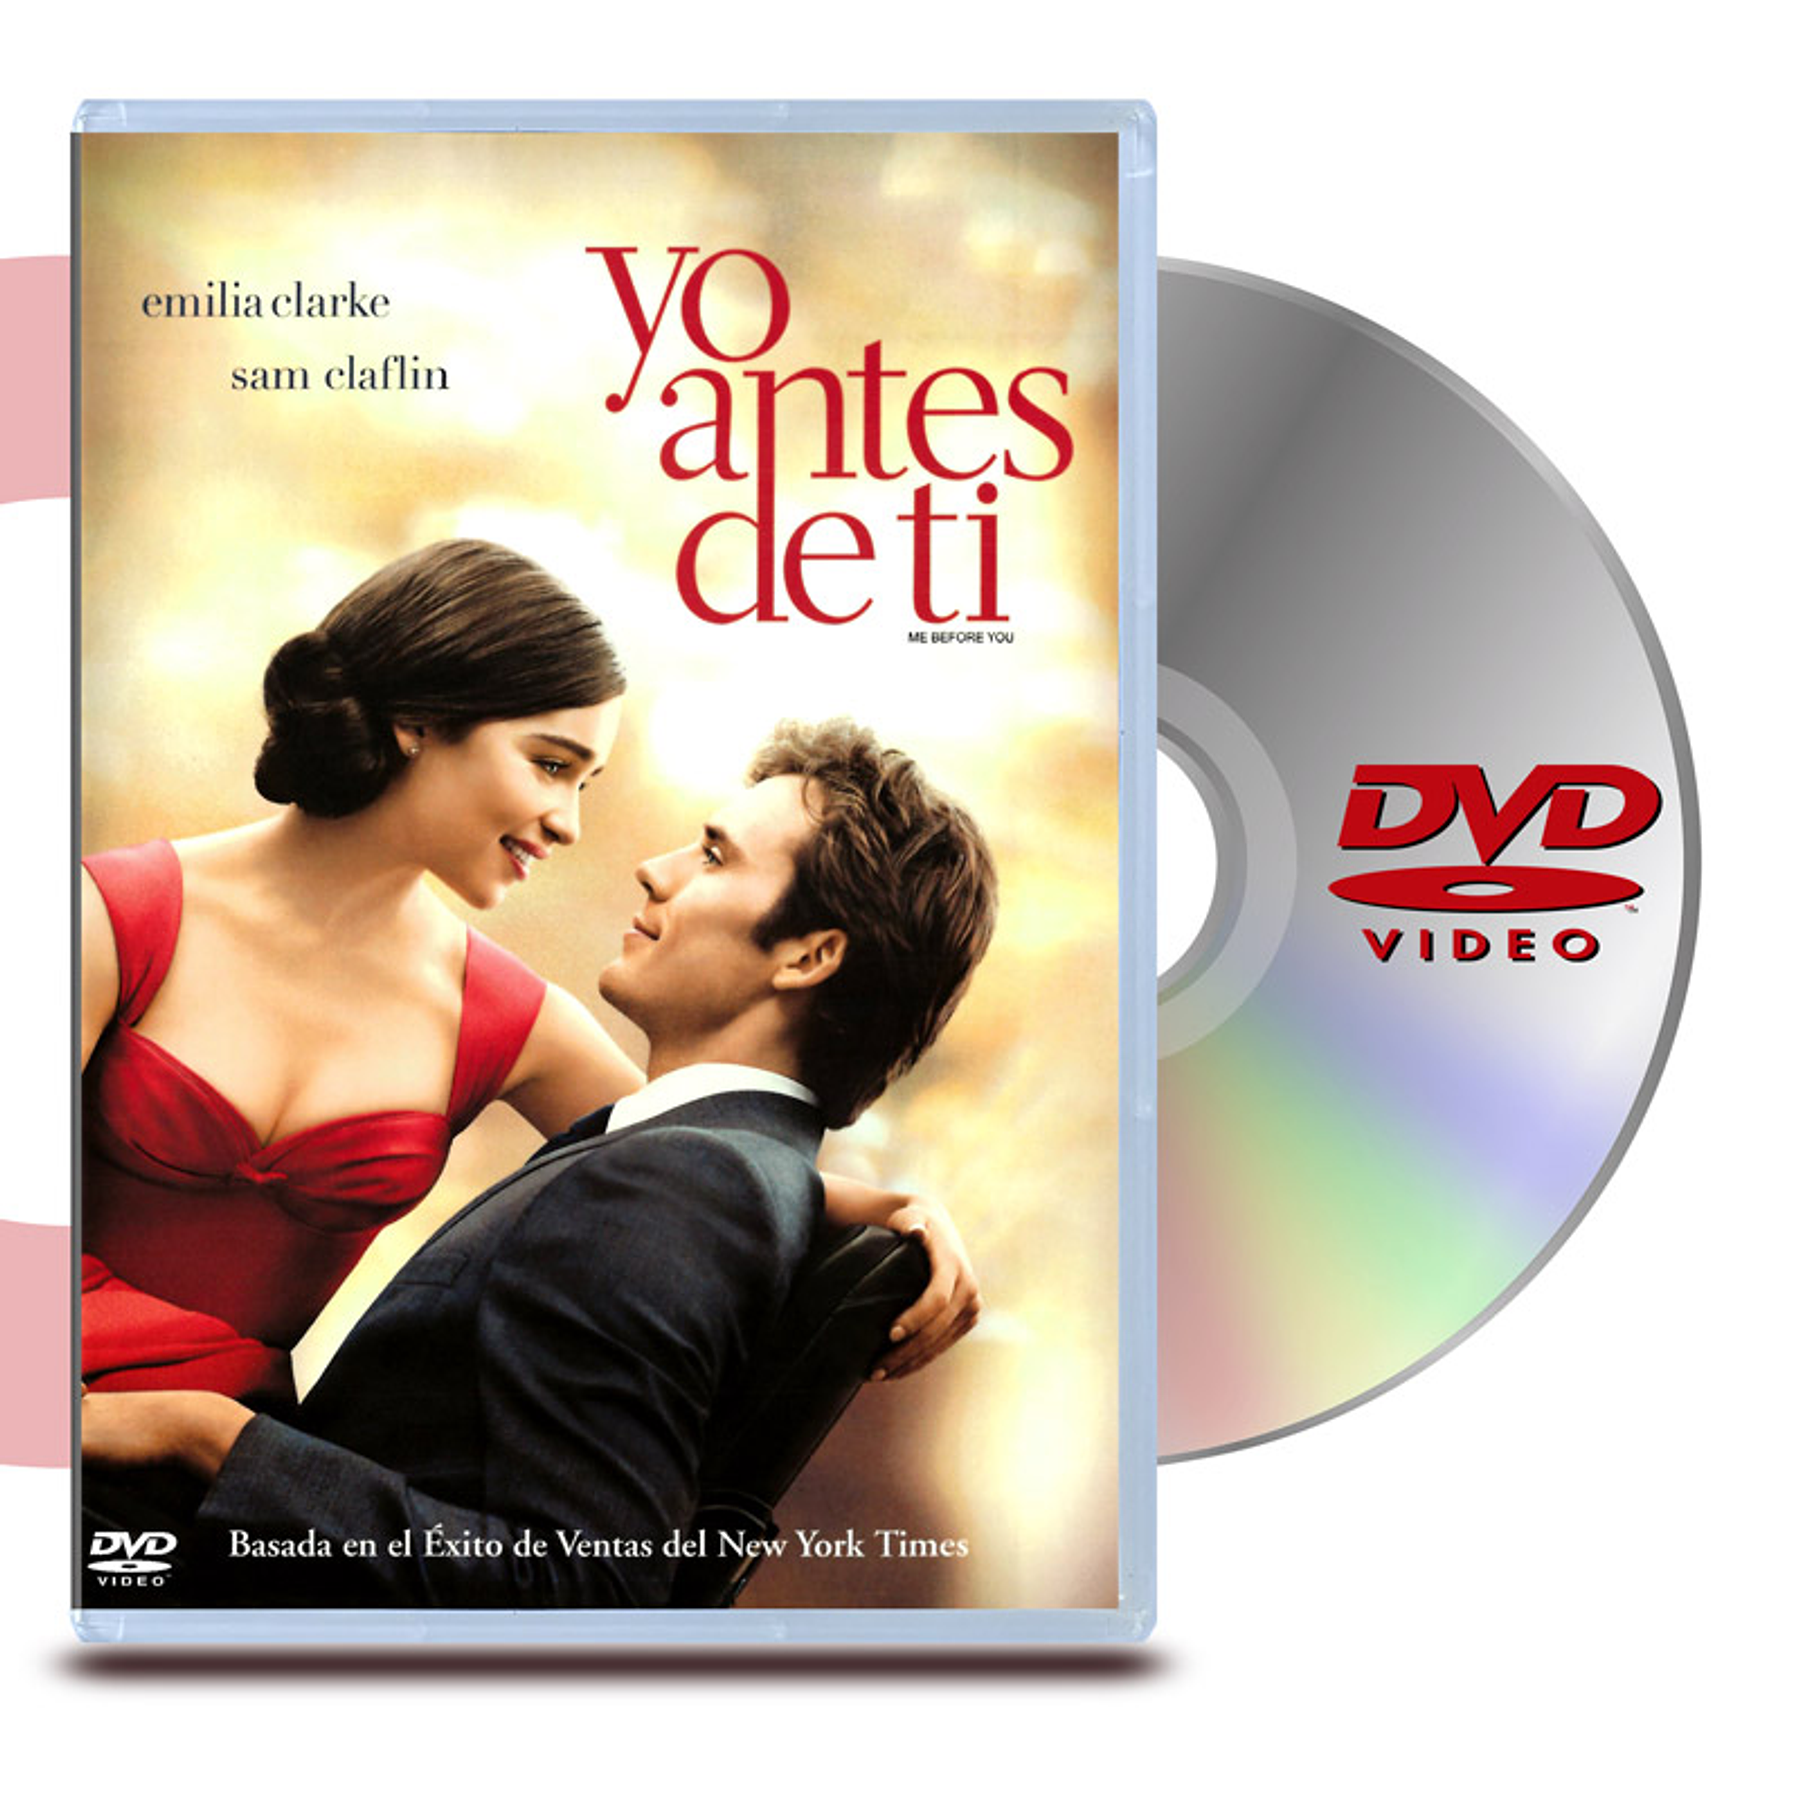 Before You (blu-ray Digital Copy) (me Before You) Dvds